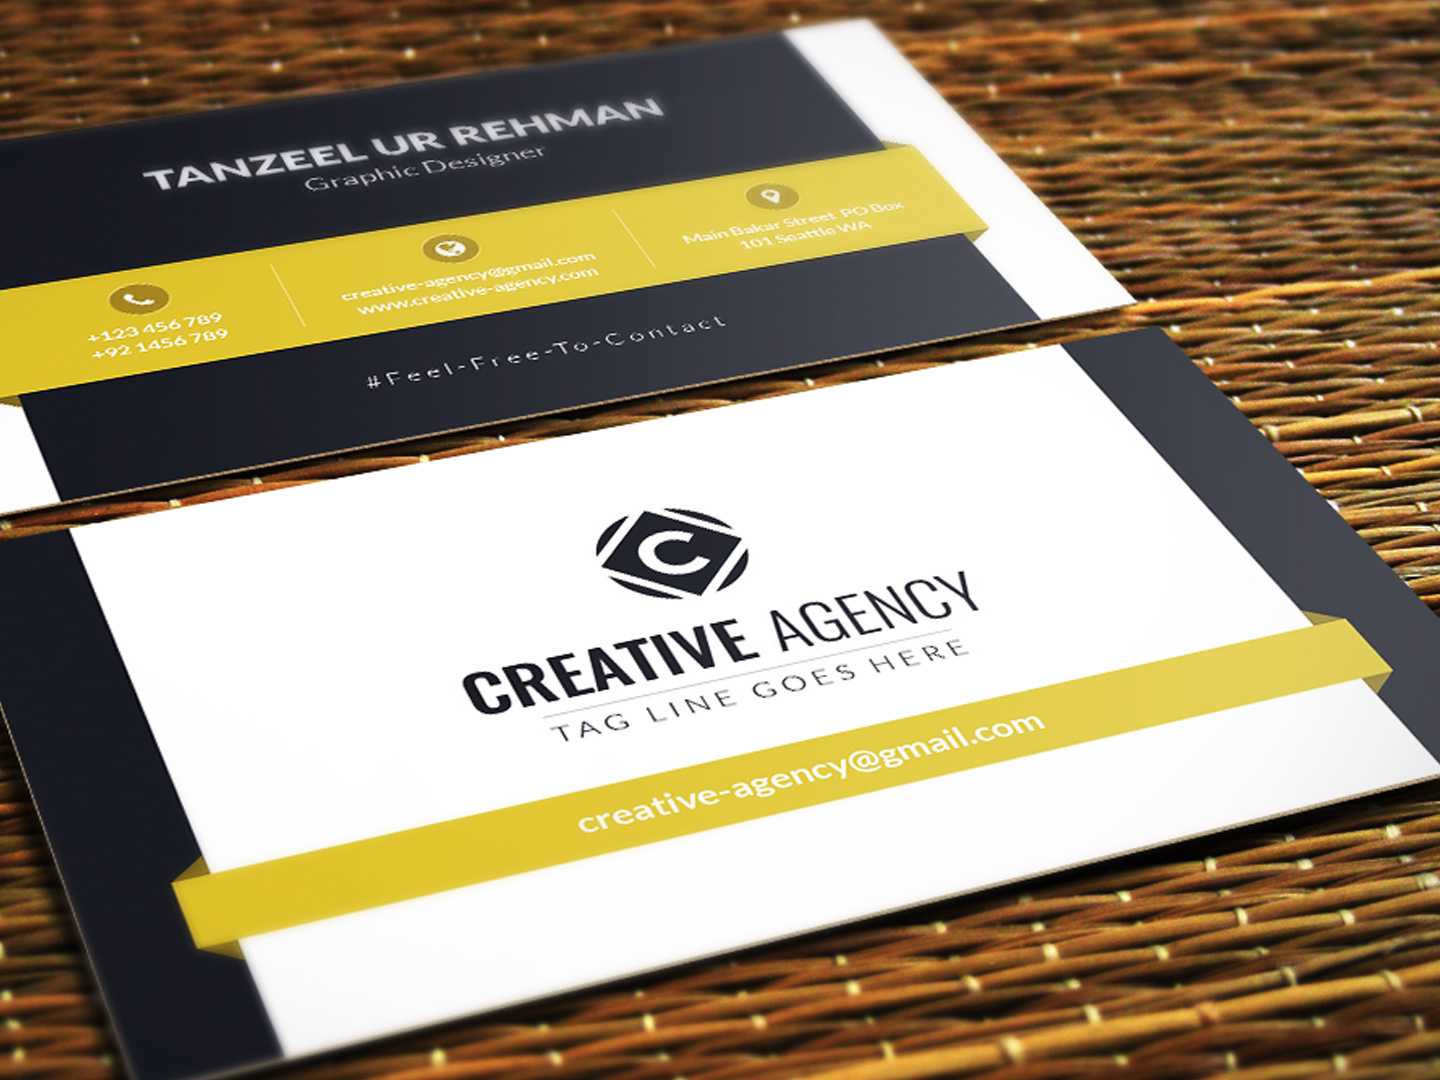 Business Cards Template – Free Downloadtanzeel Ur Rehman With Templates For Visiting Cards Free Downloads